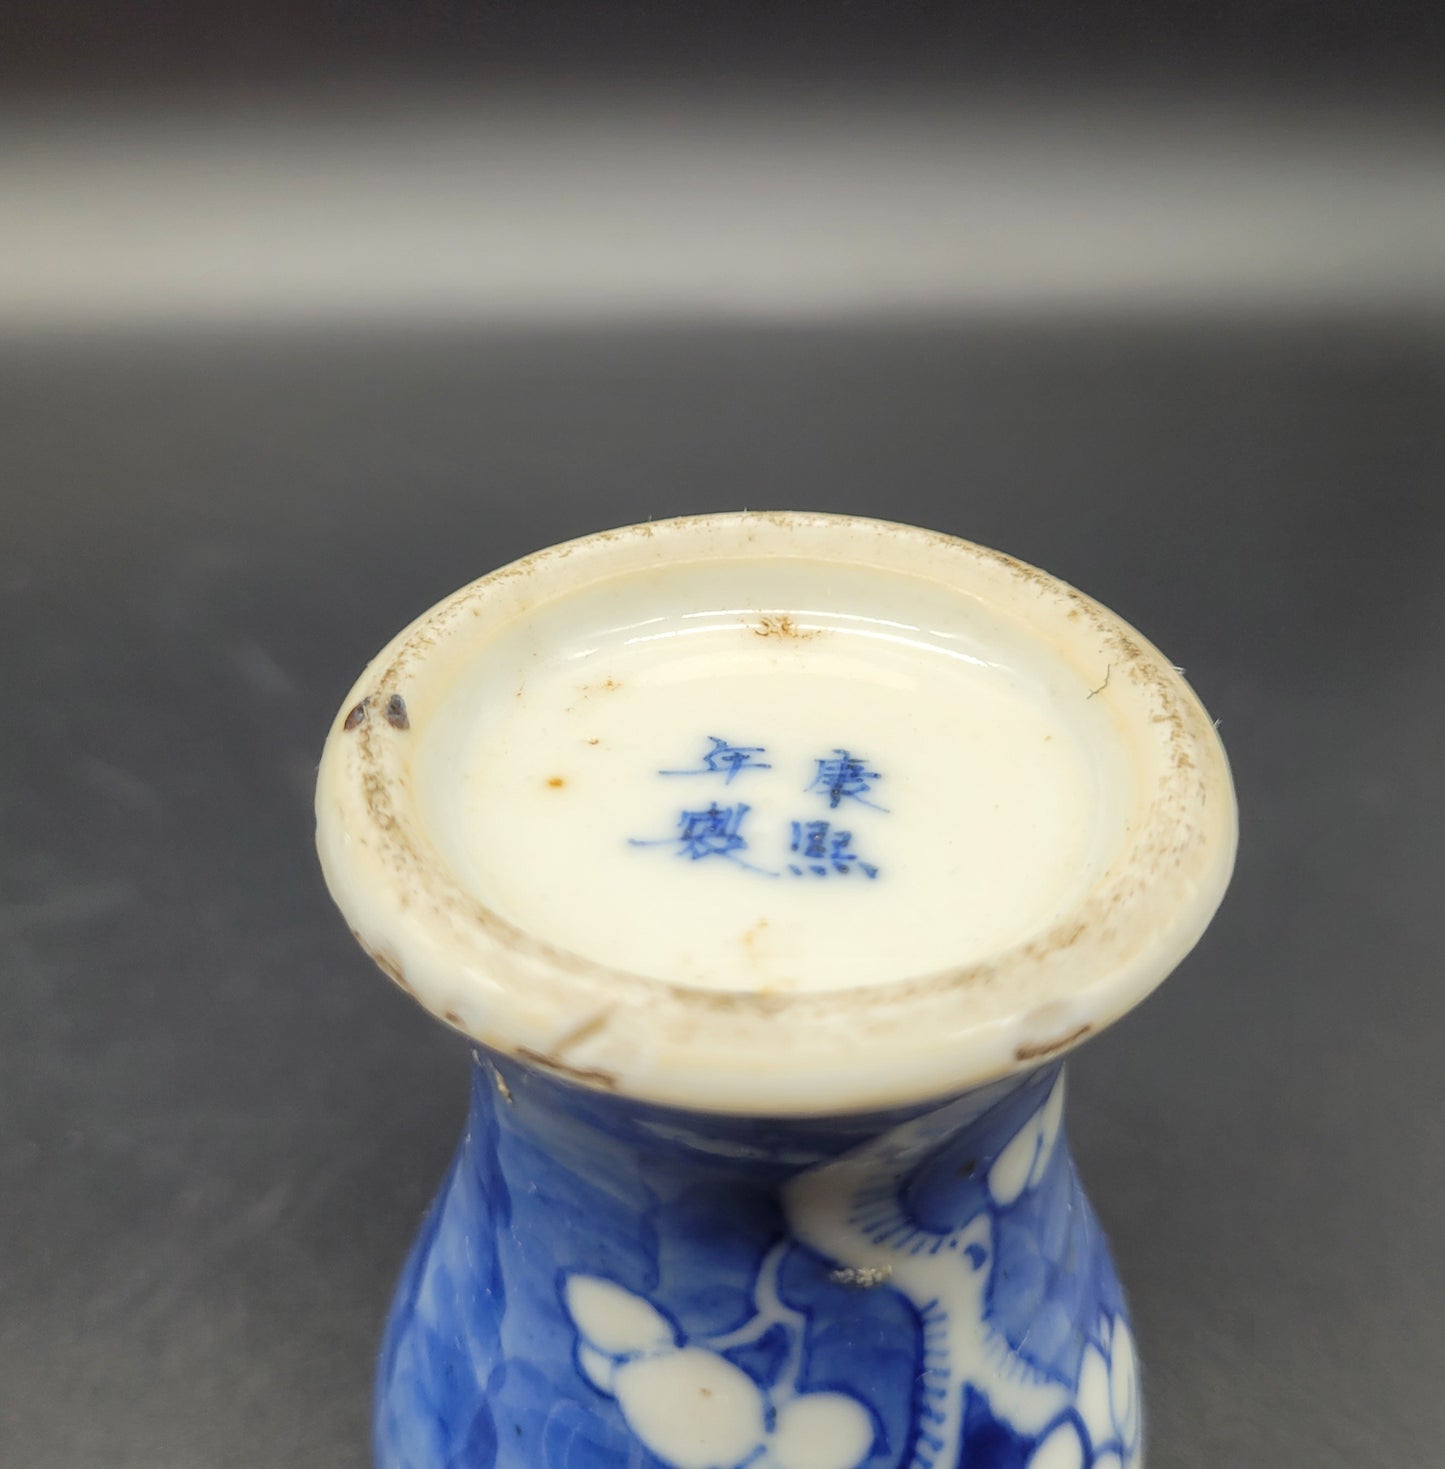 Christies auction house Buy Antiques Online Chinese 19th Century Prunus Pattern Miniature Vases SIGNED